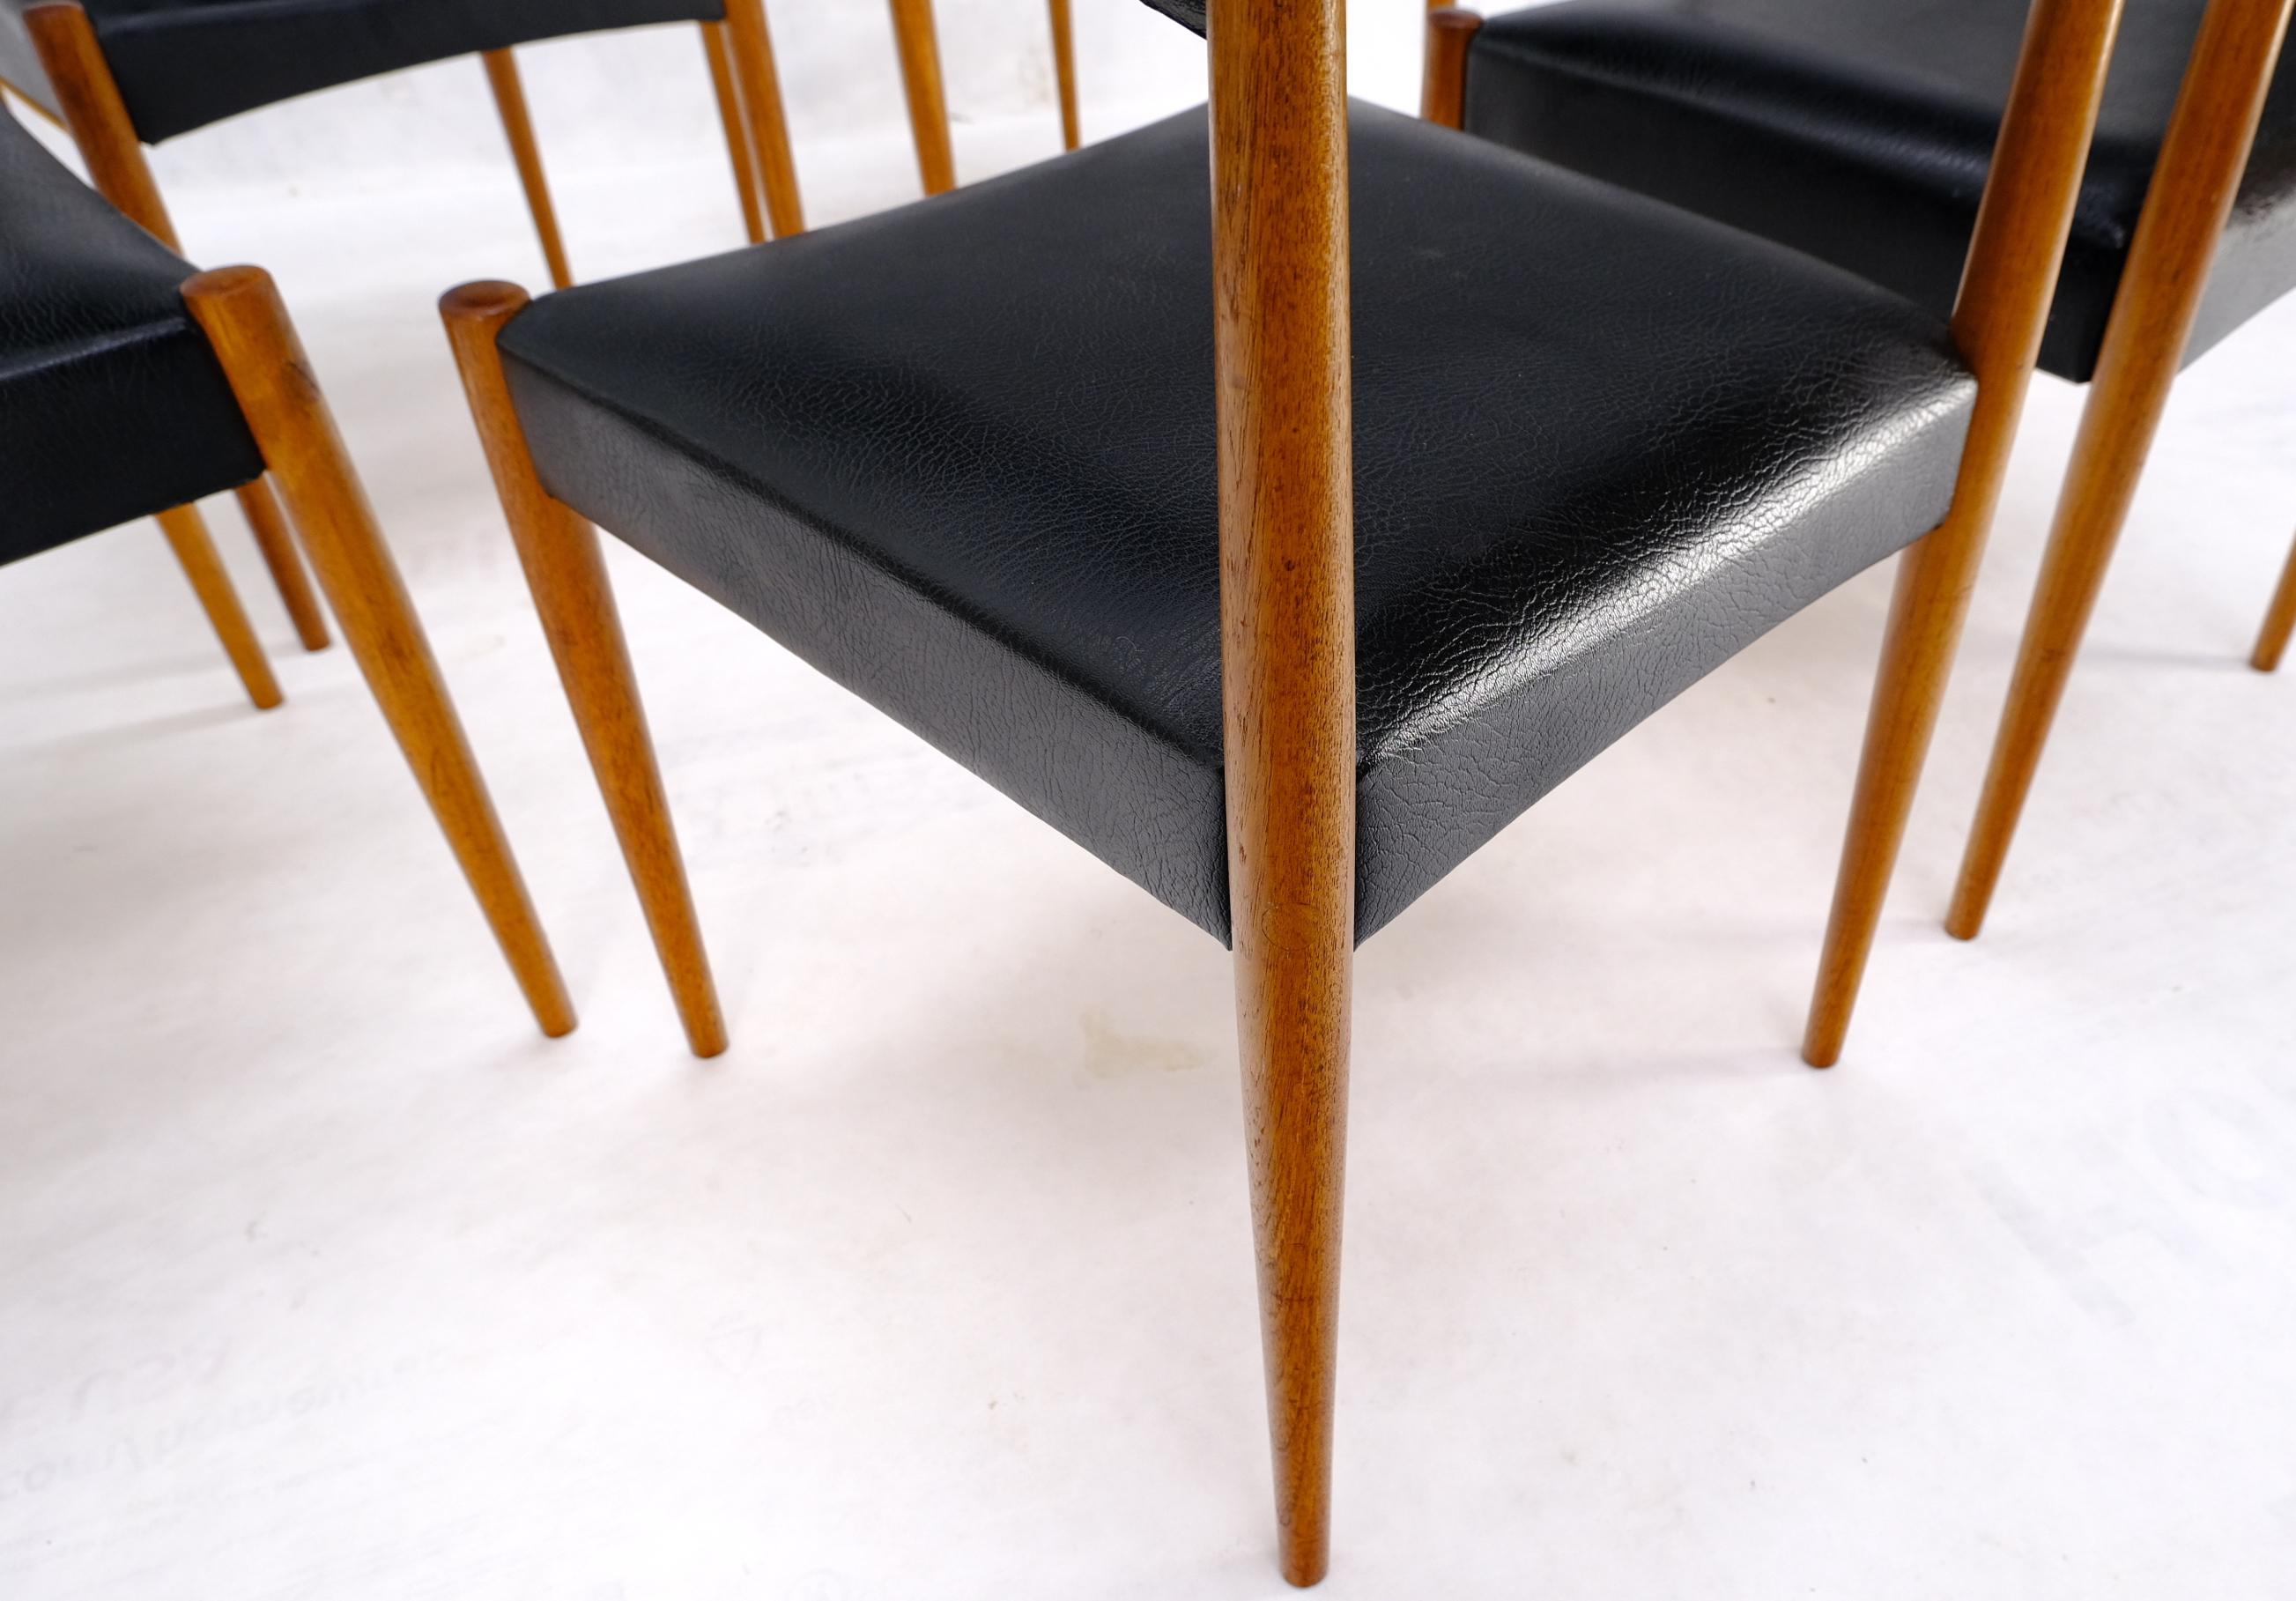 Set of 6 Danish Teak Mid Century Modern Dining Chairs in Black Upholstery For Sale 1